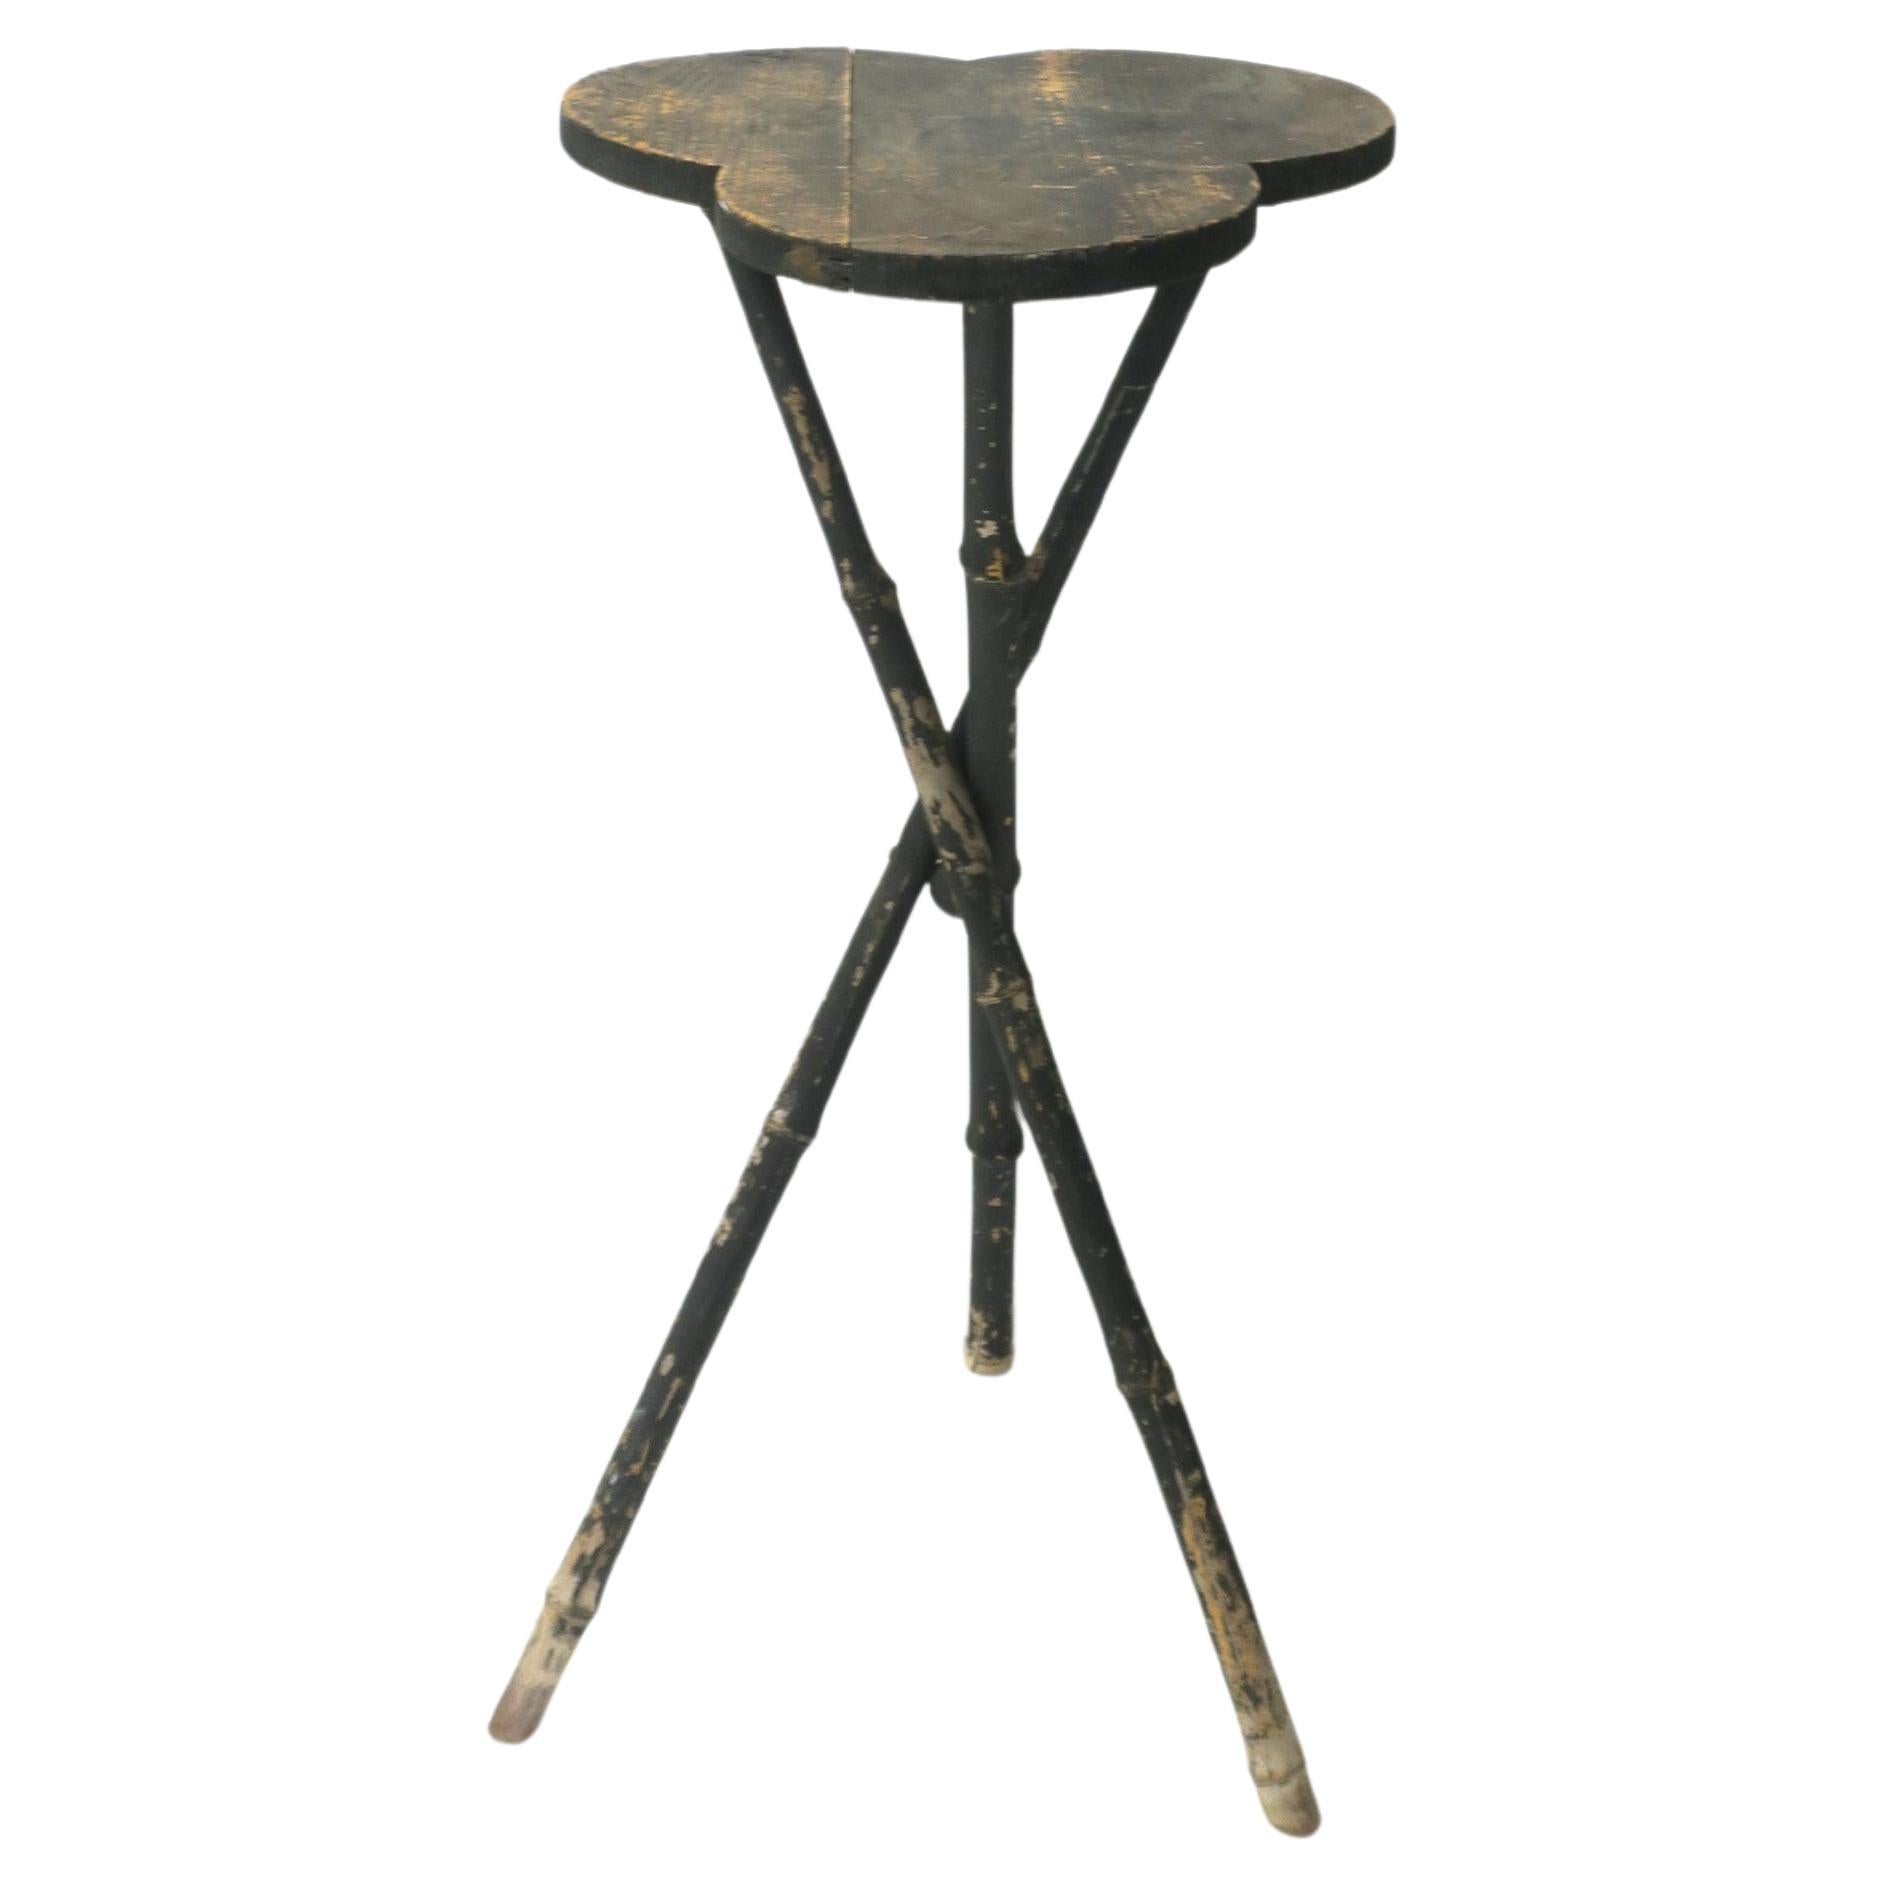 Rustic Wood and Bamboo Side Drinks Table or Plant Stand For Sale